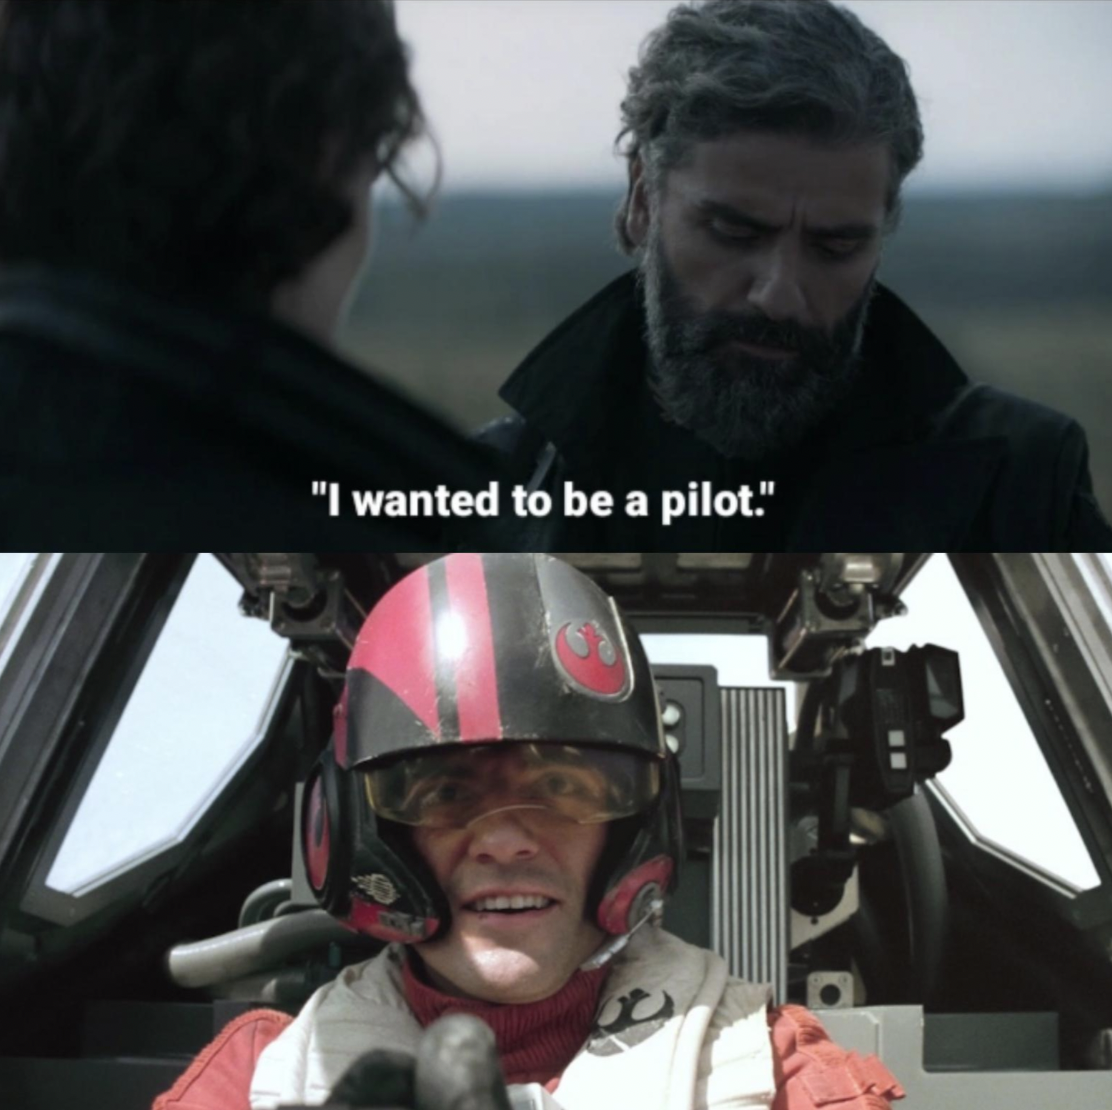 helmet - "I wanted to be a pilot."